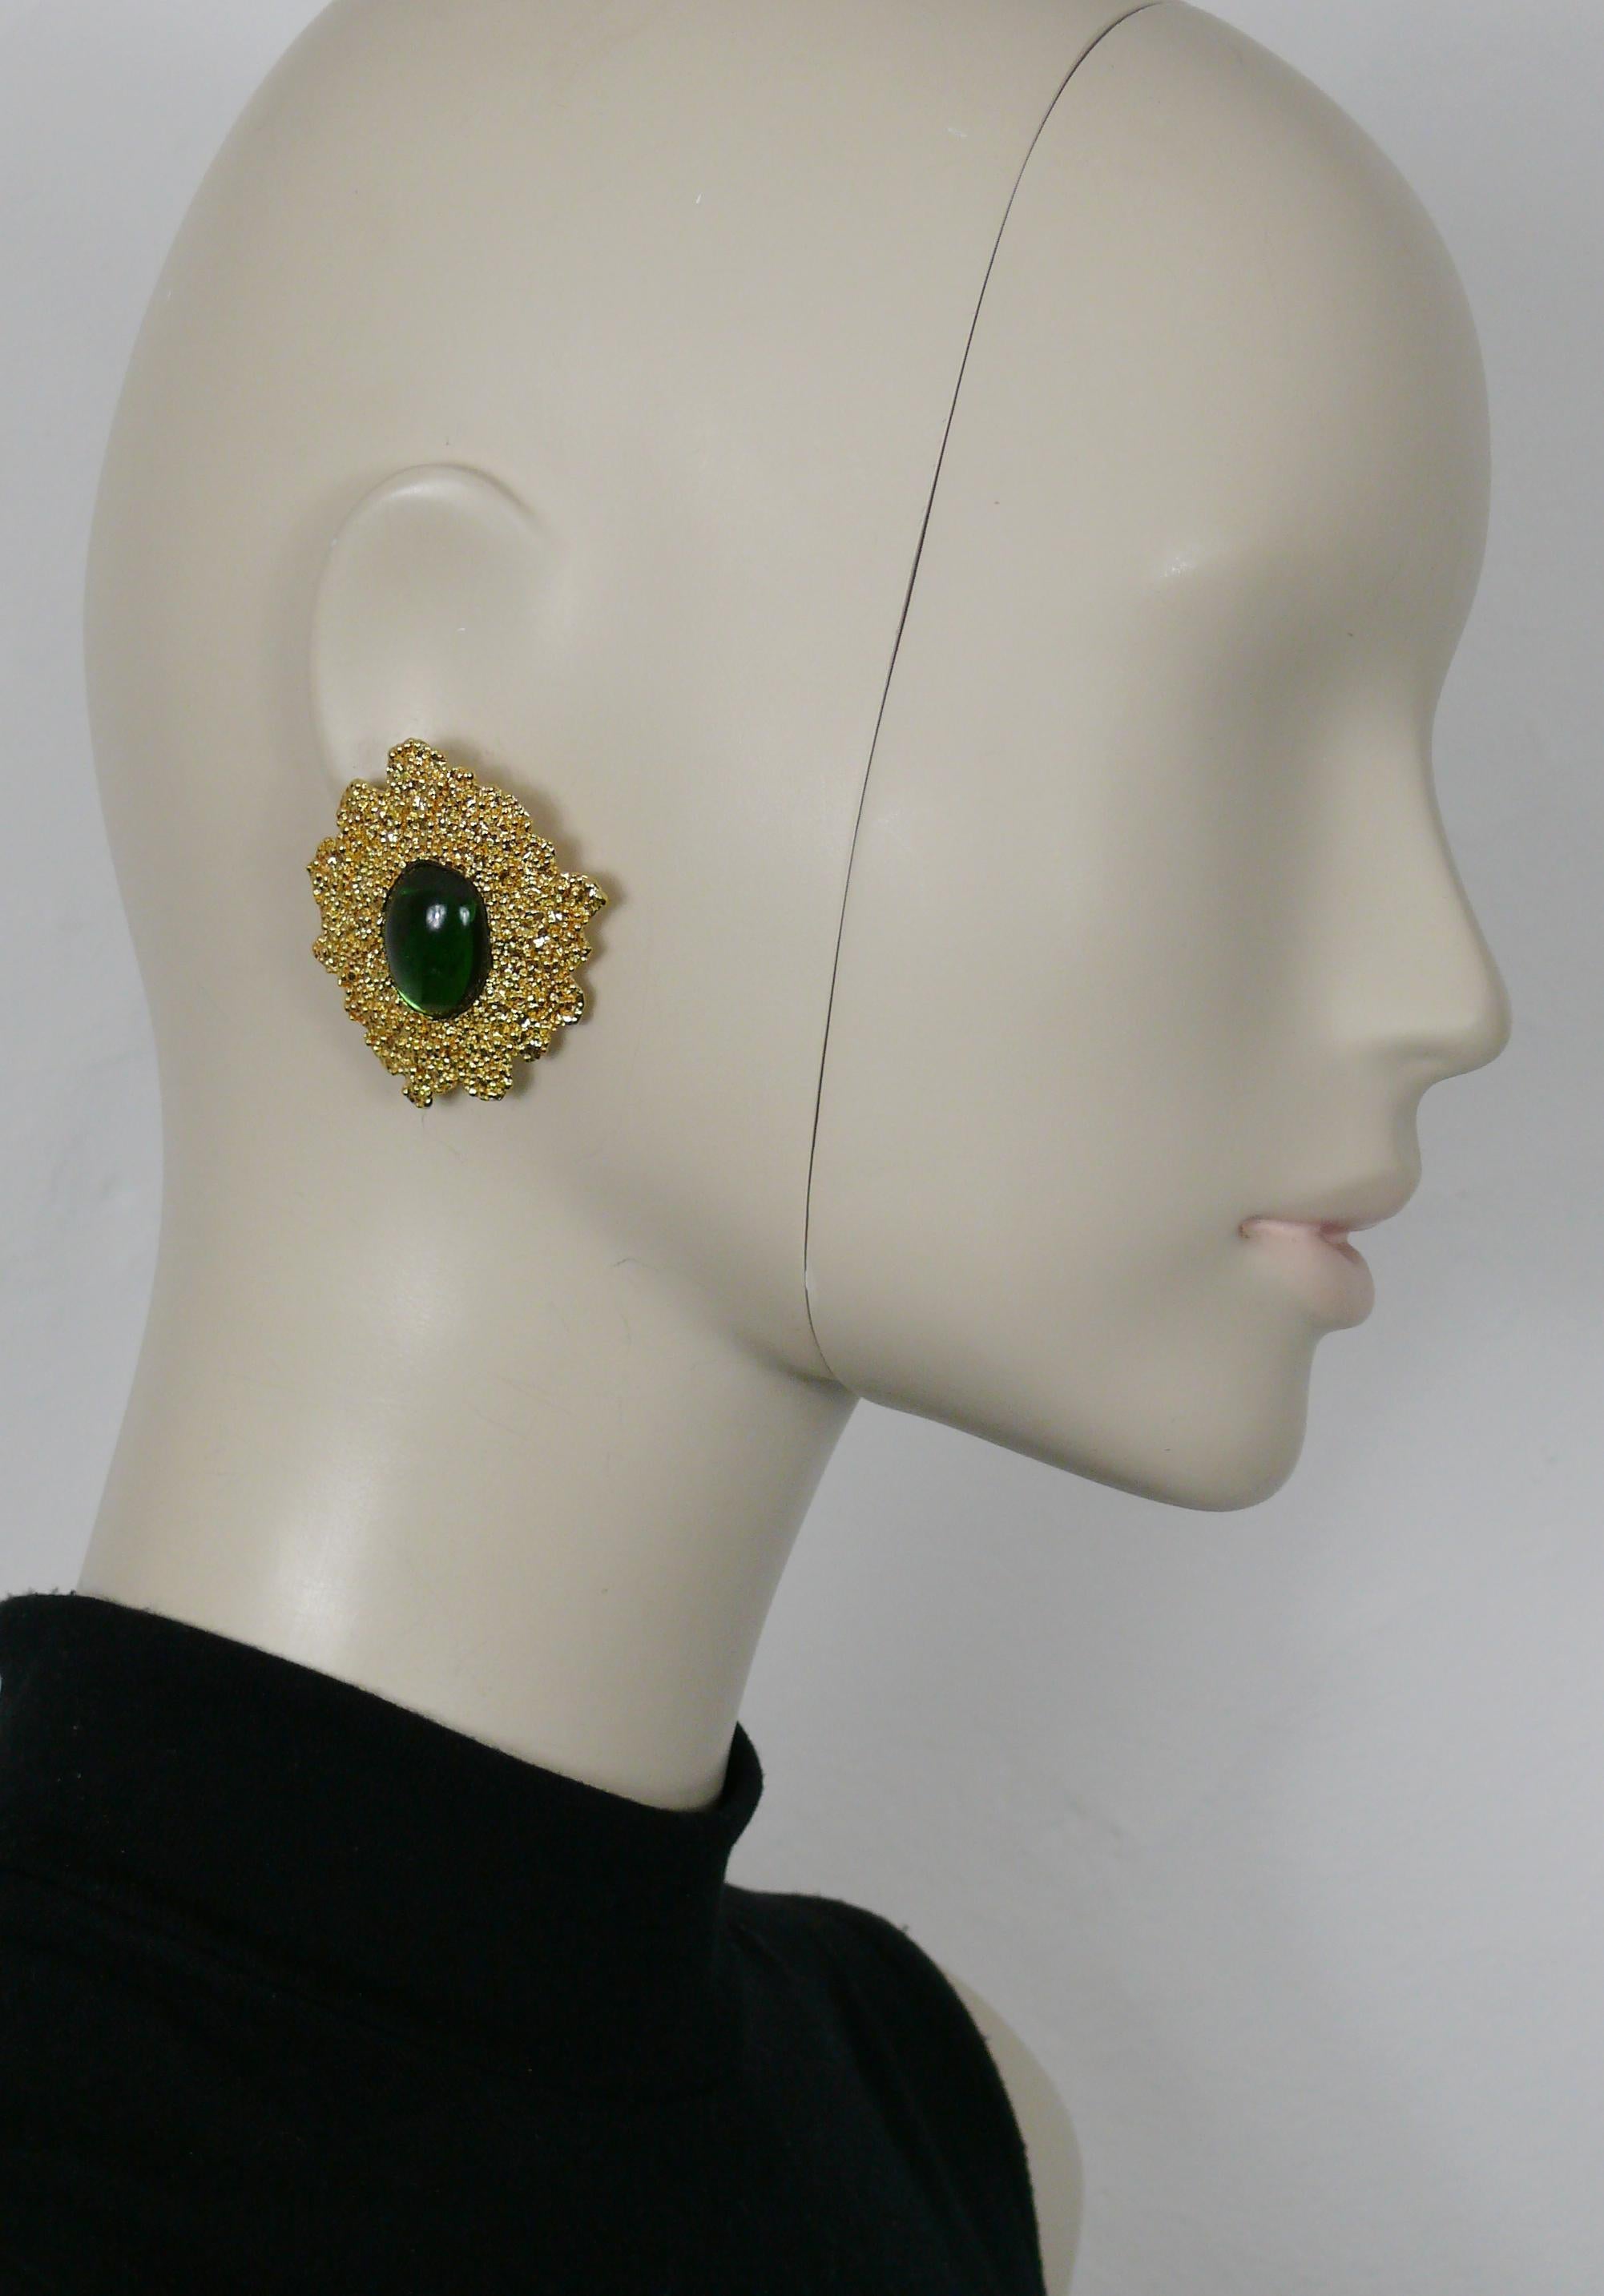 YVES SAINT LAURENT vintage textured clip-on earrings featuring a large emerald green colour resin cabochon.

Gold tone metal hardware.

Embossed YSL Made in France.

Indicative measurements : max. height approx. 4.8 cm (1.89 inches) / max. width